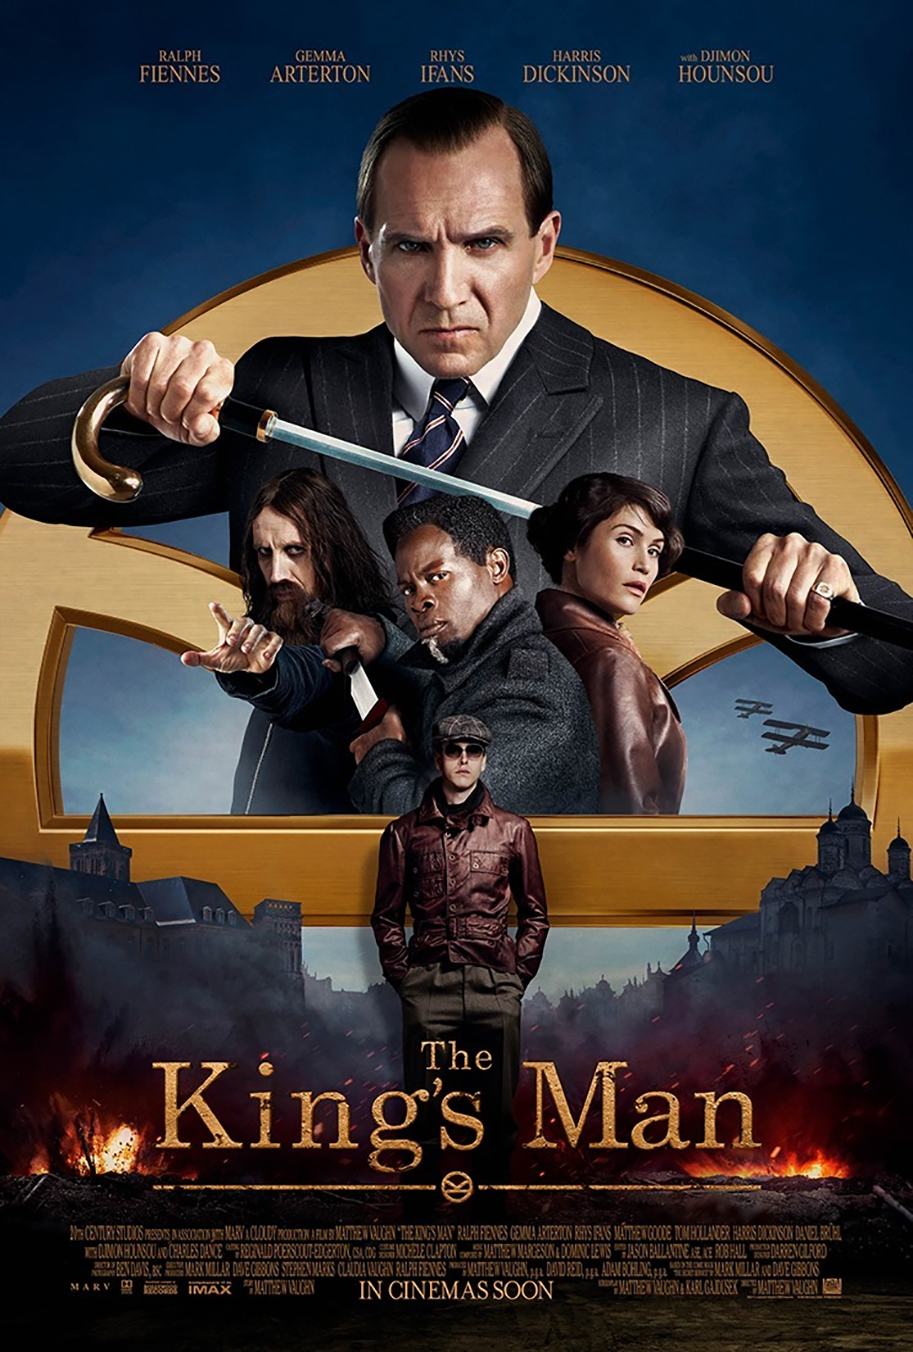 The King's Man (2020) Movie Online